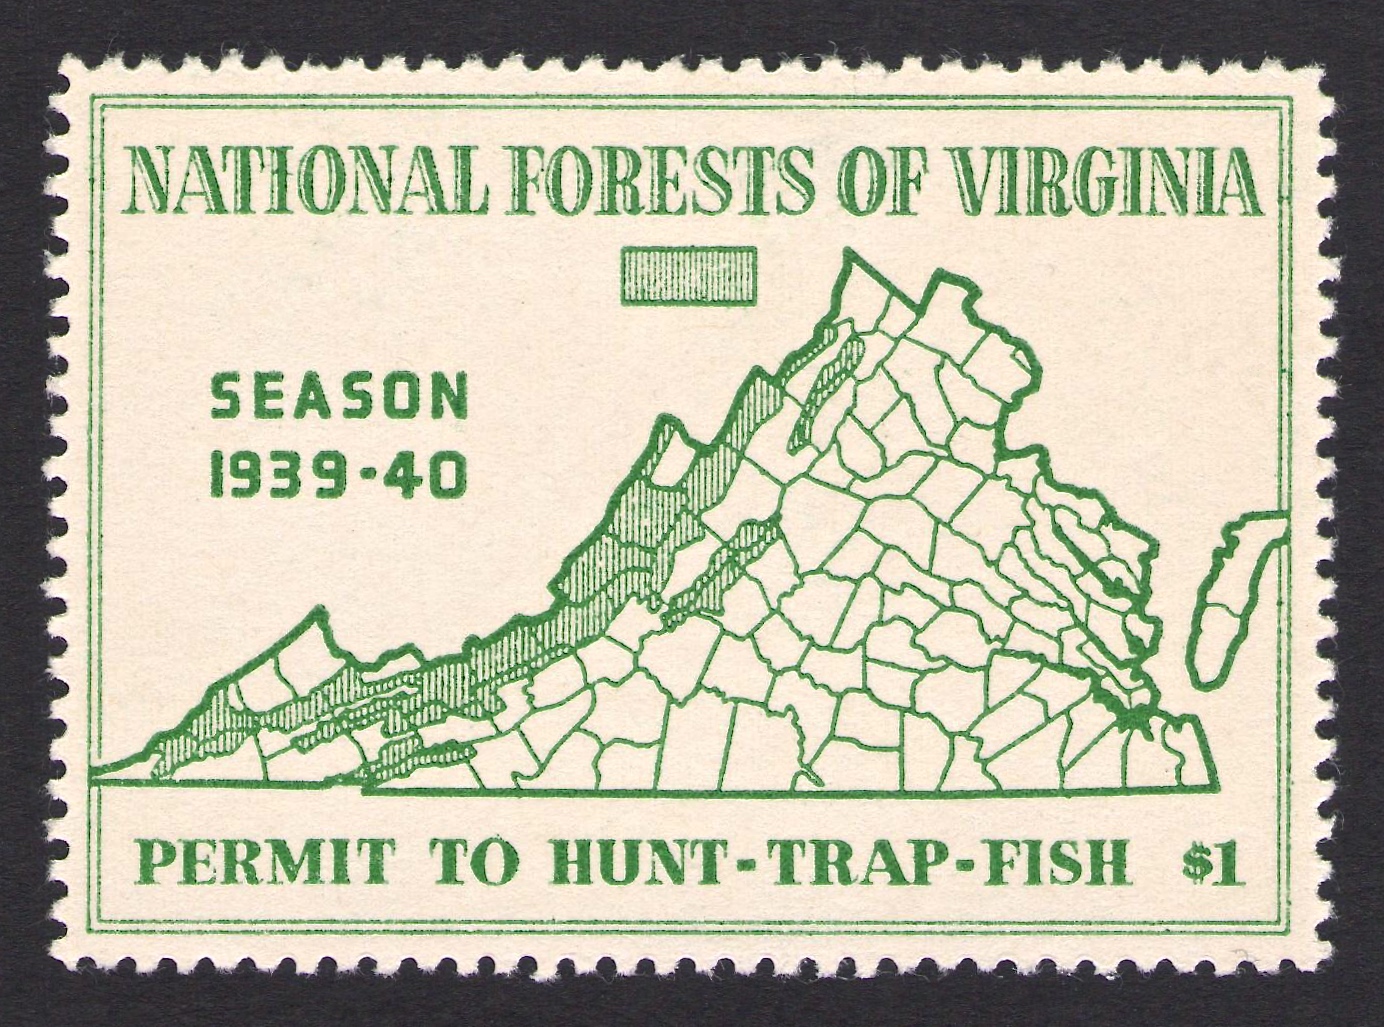 1939-40 National Forest Virginia